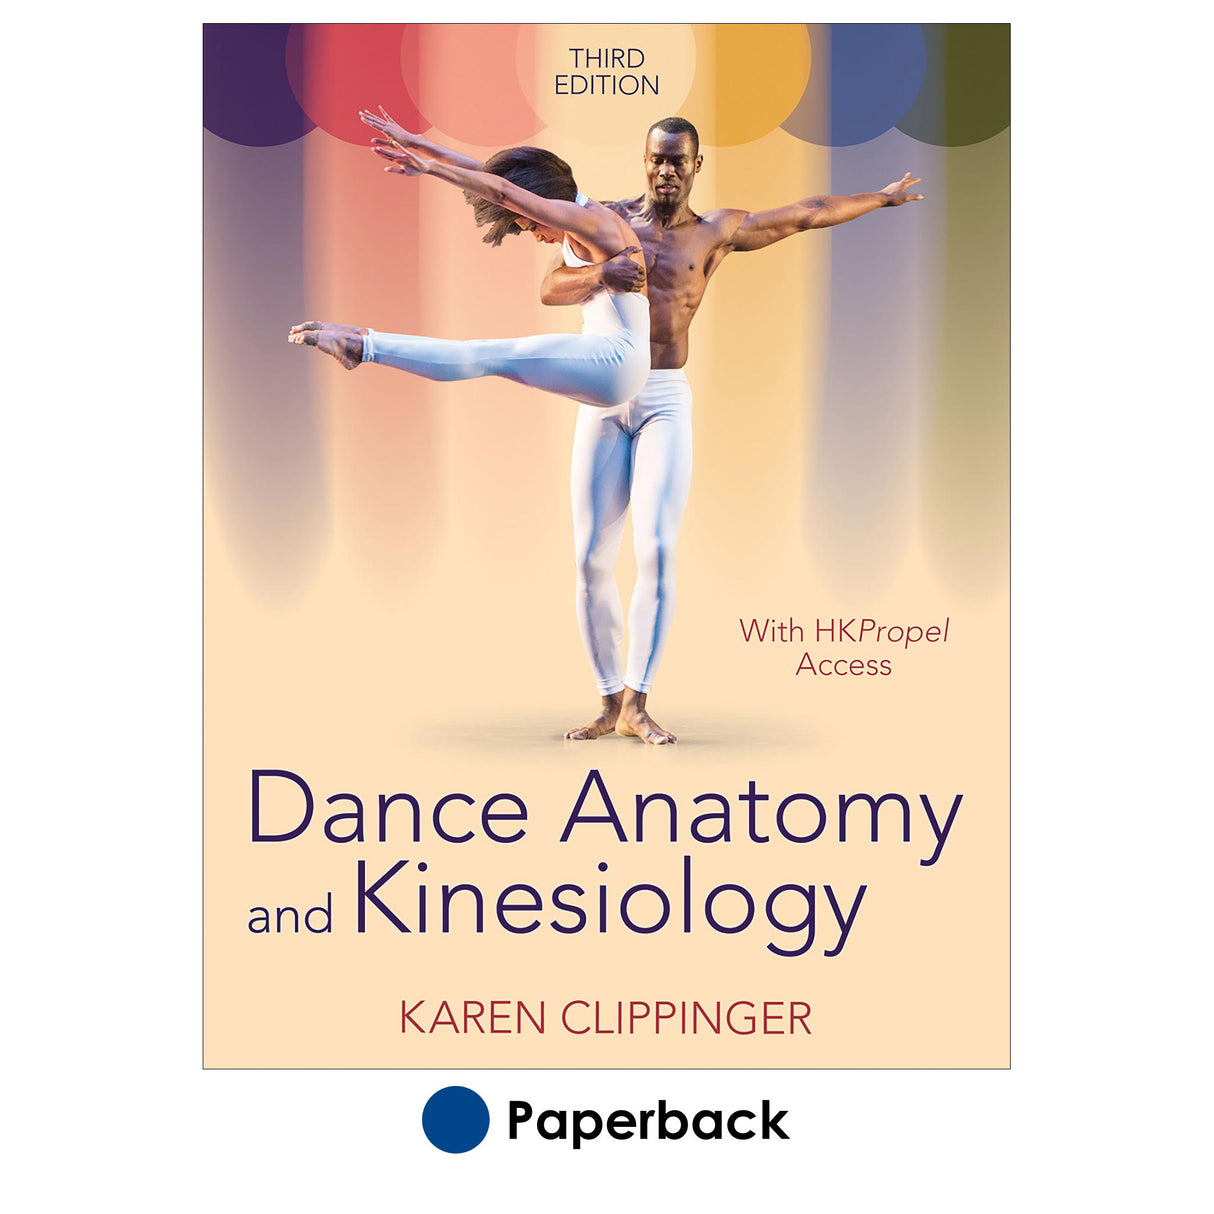 Dance Anatomy and Kinesiology 3rd Edition With HKPropel Access